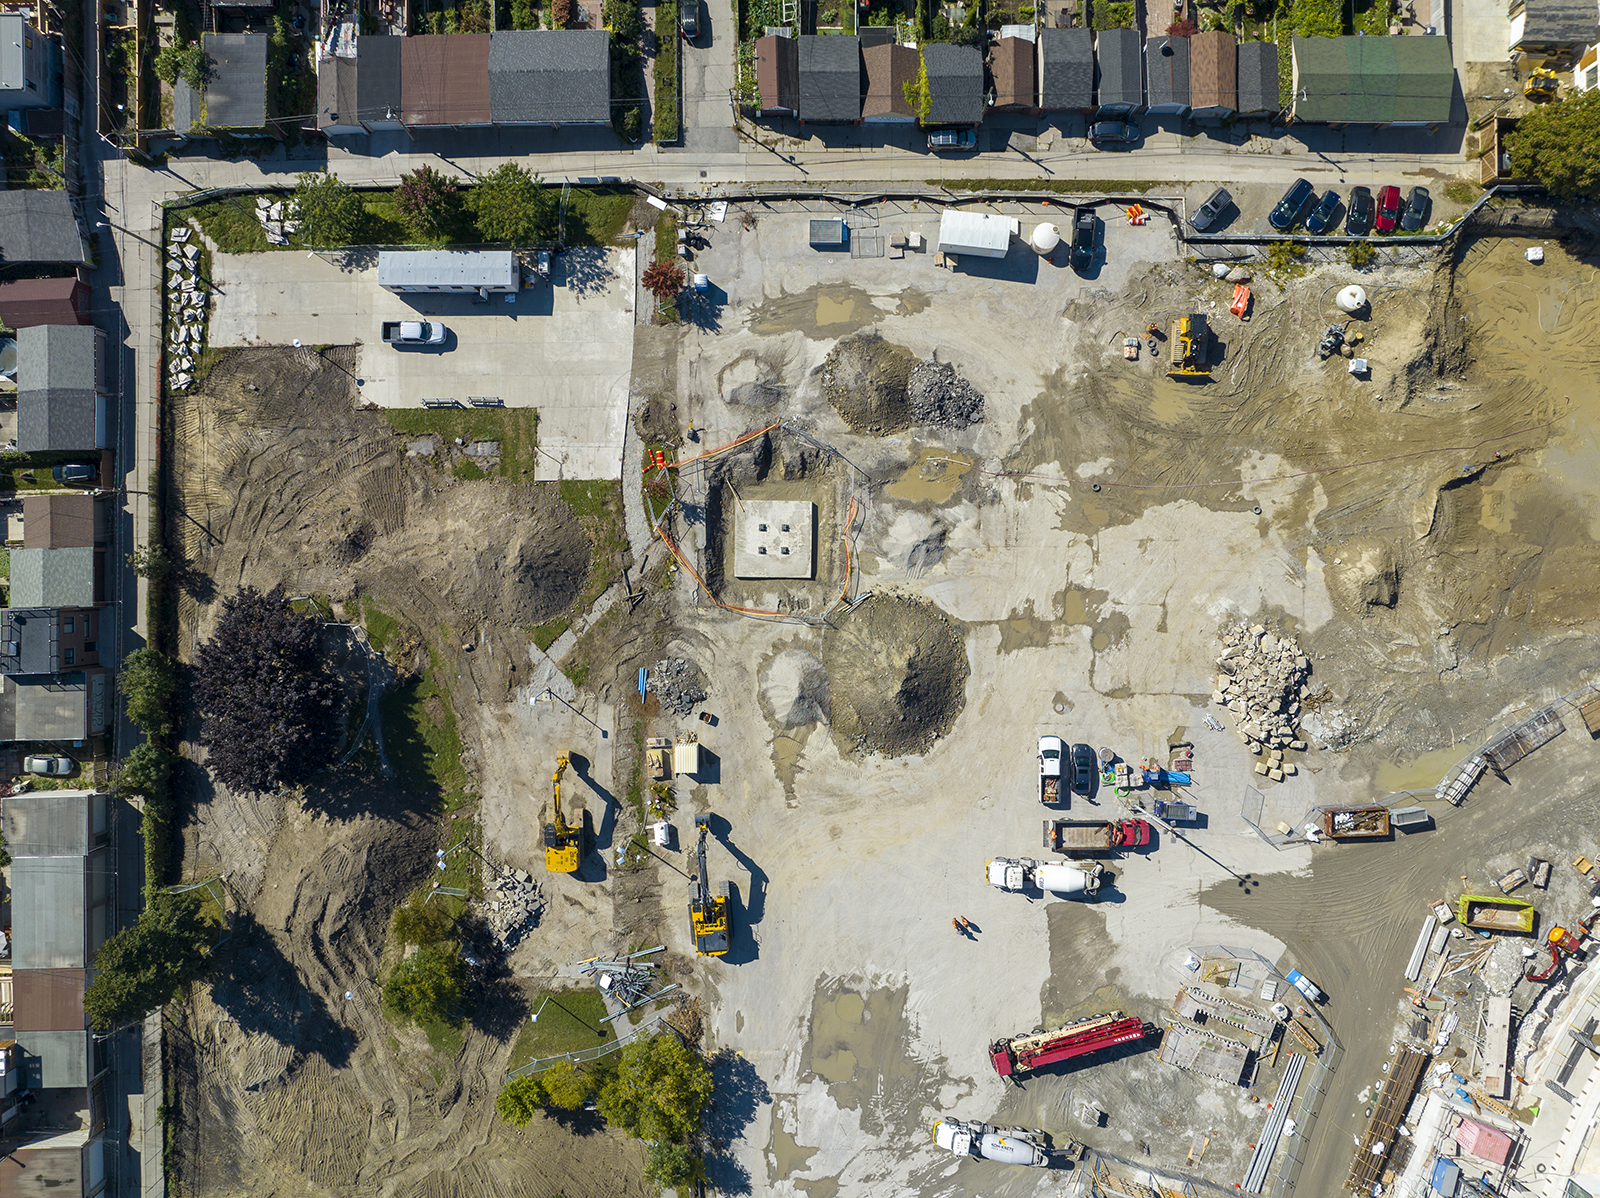 An aerial photo taken from above by a drone of the construction site at Wallace Emerson Park. The image shows construction equipment, cars and trucks at the project site, with small flat areas that have been excavated in preparation for below ground construction. Residential homes line the perimeter of the construction site. 